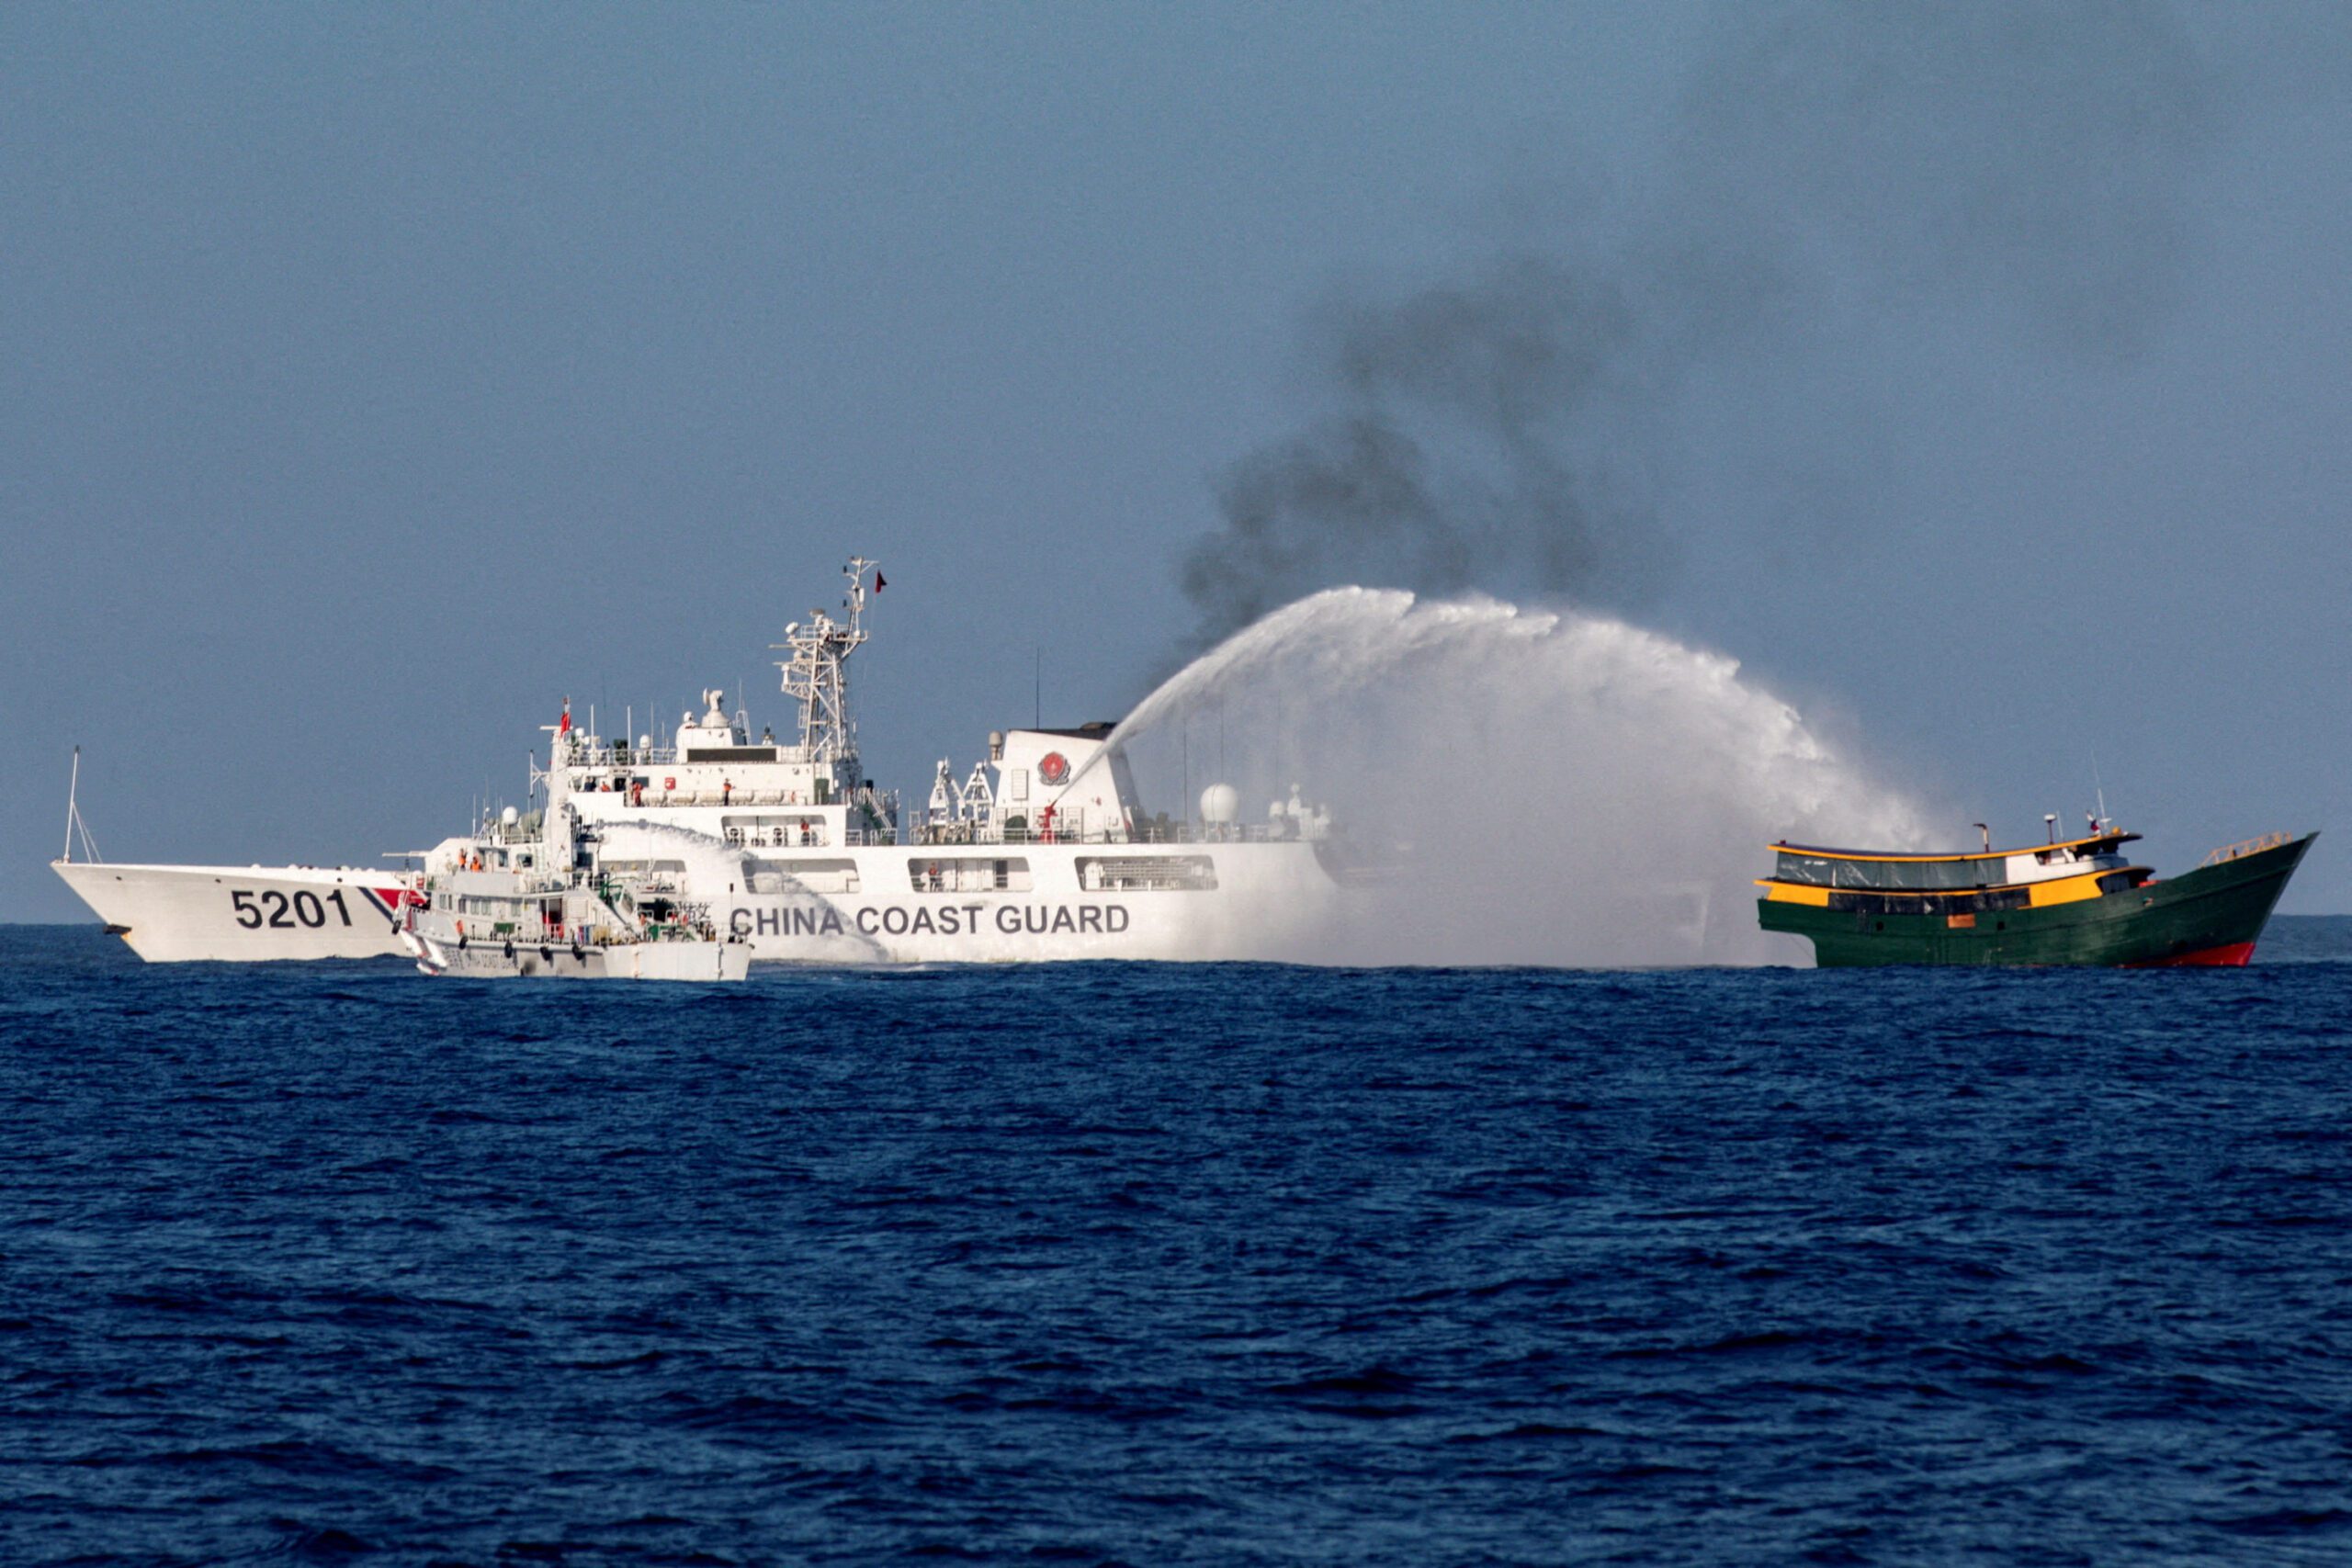 China CG cutter firing water at a Philippine resupply boat